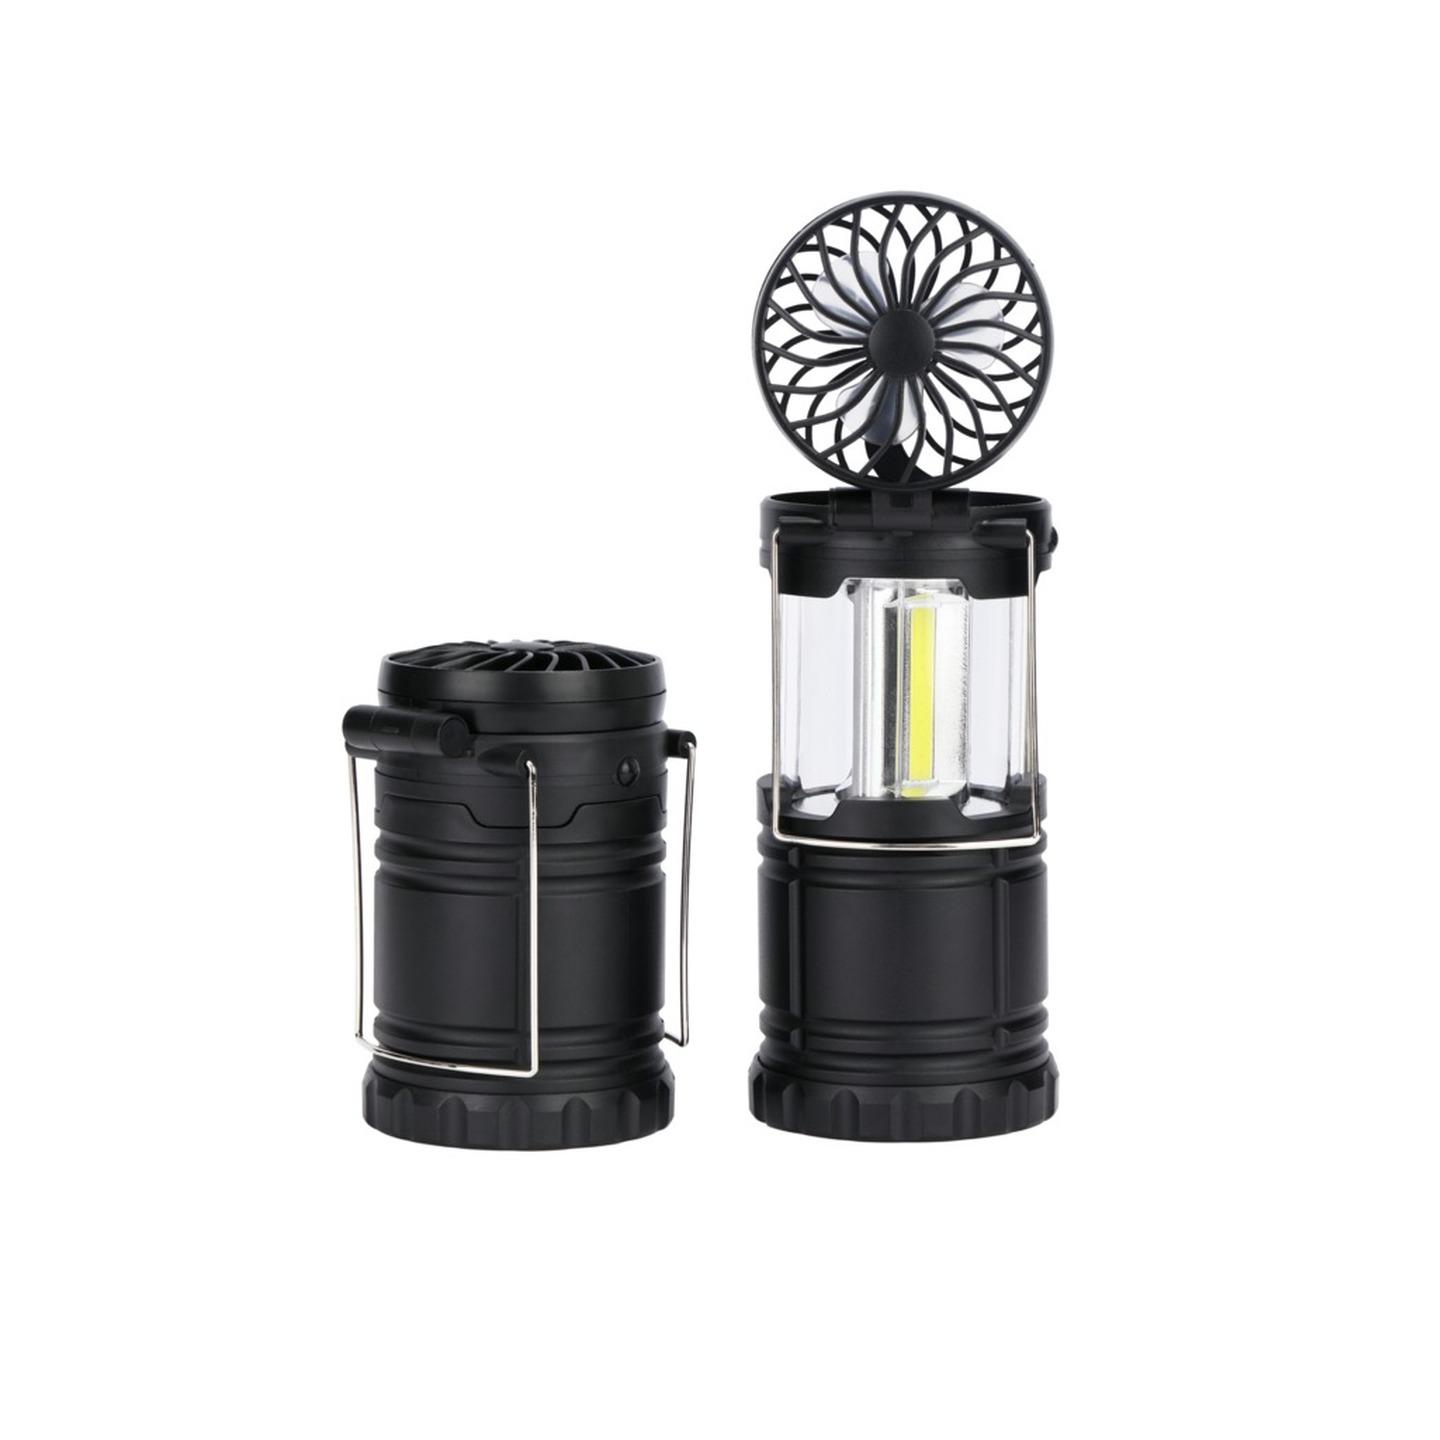 2 in 1 Collapsible LED Lantern with Fan